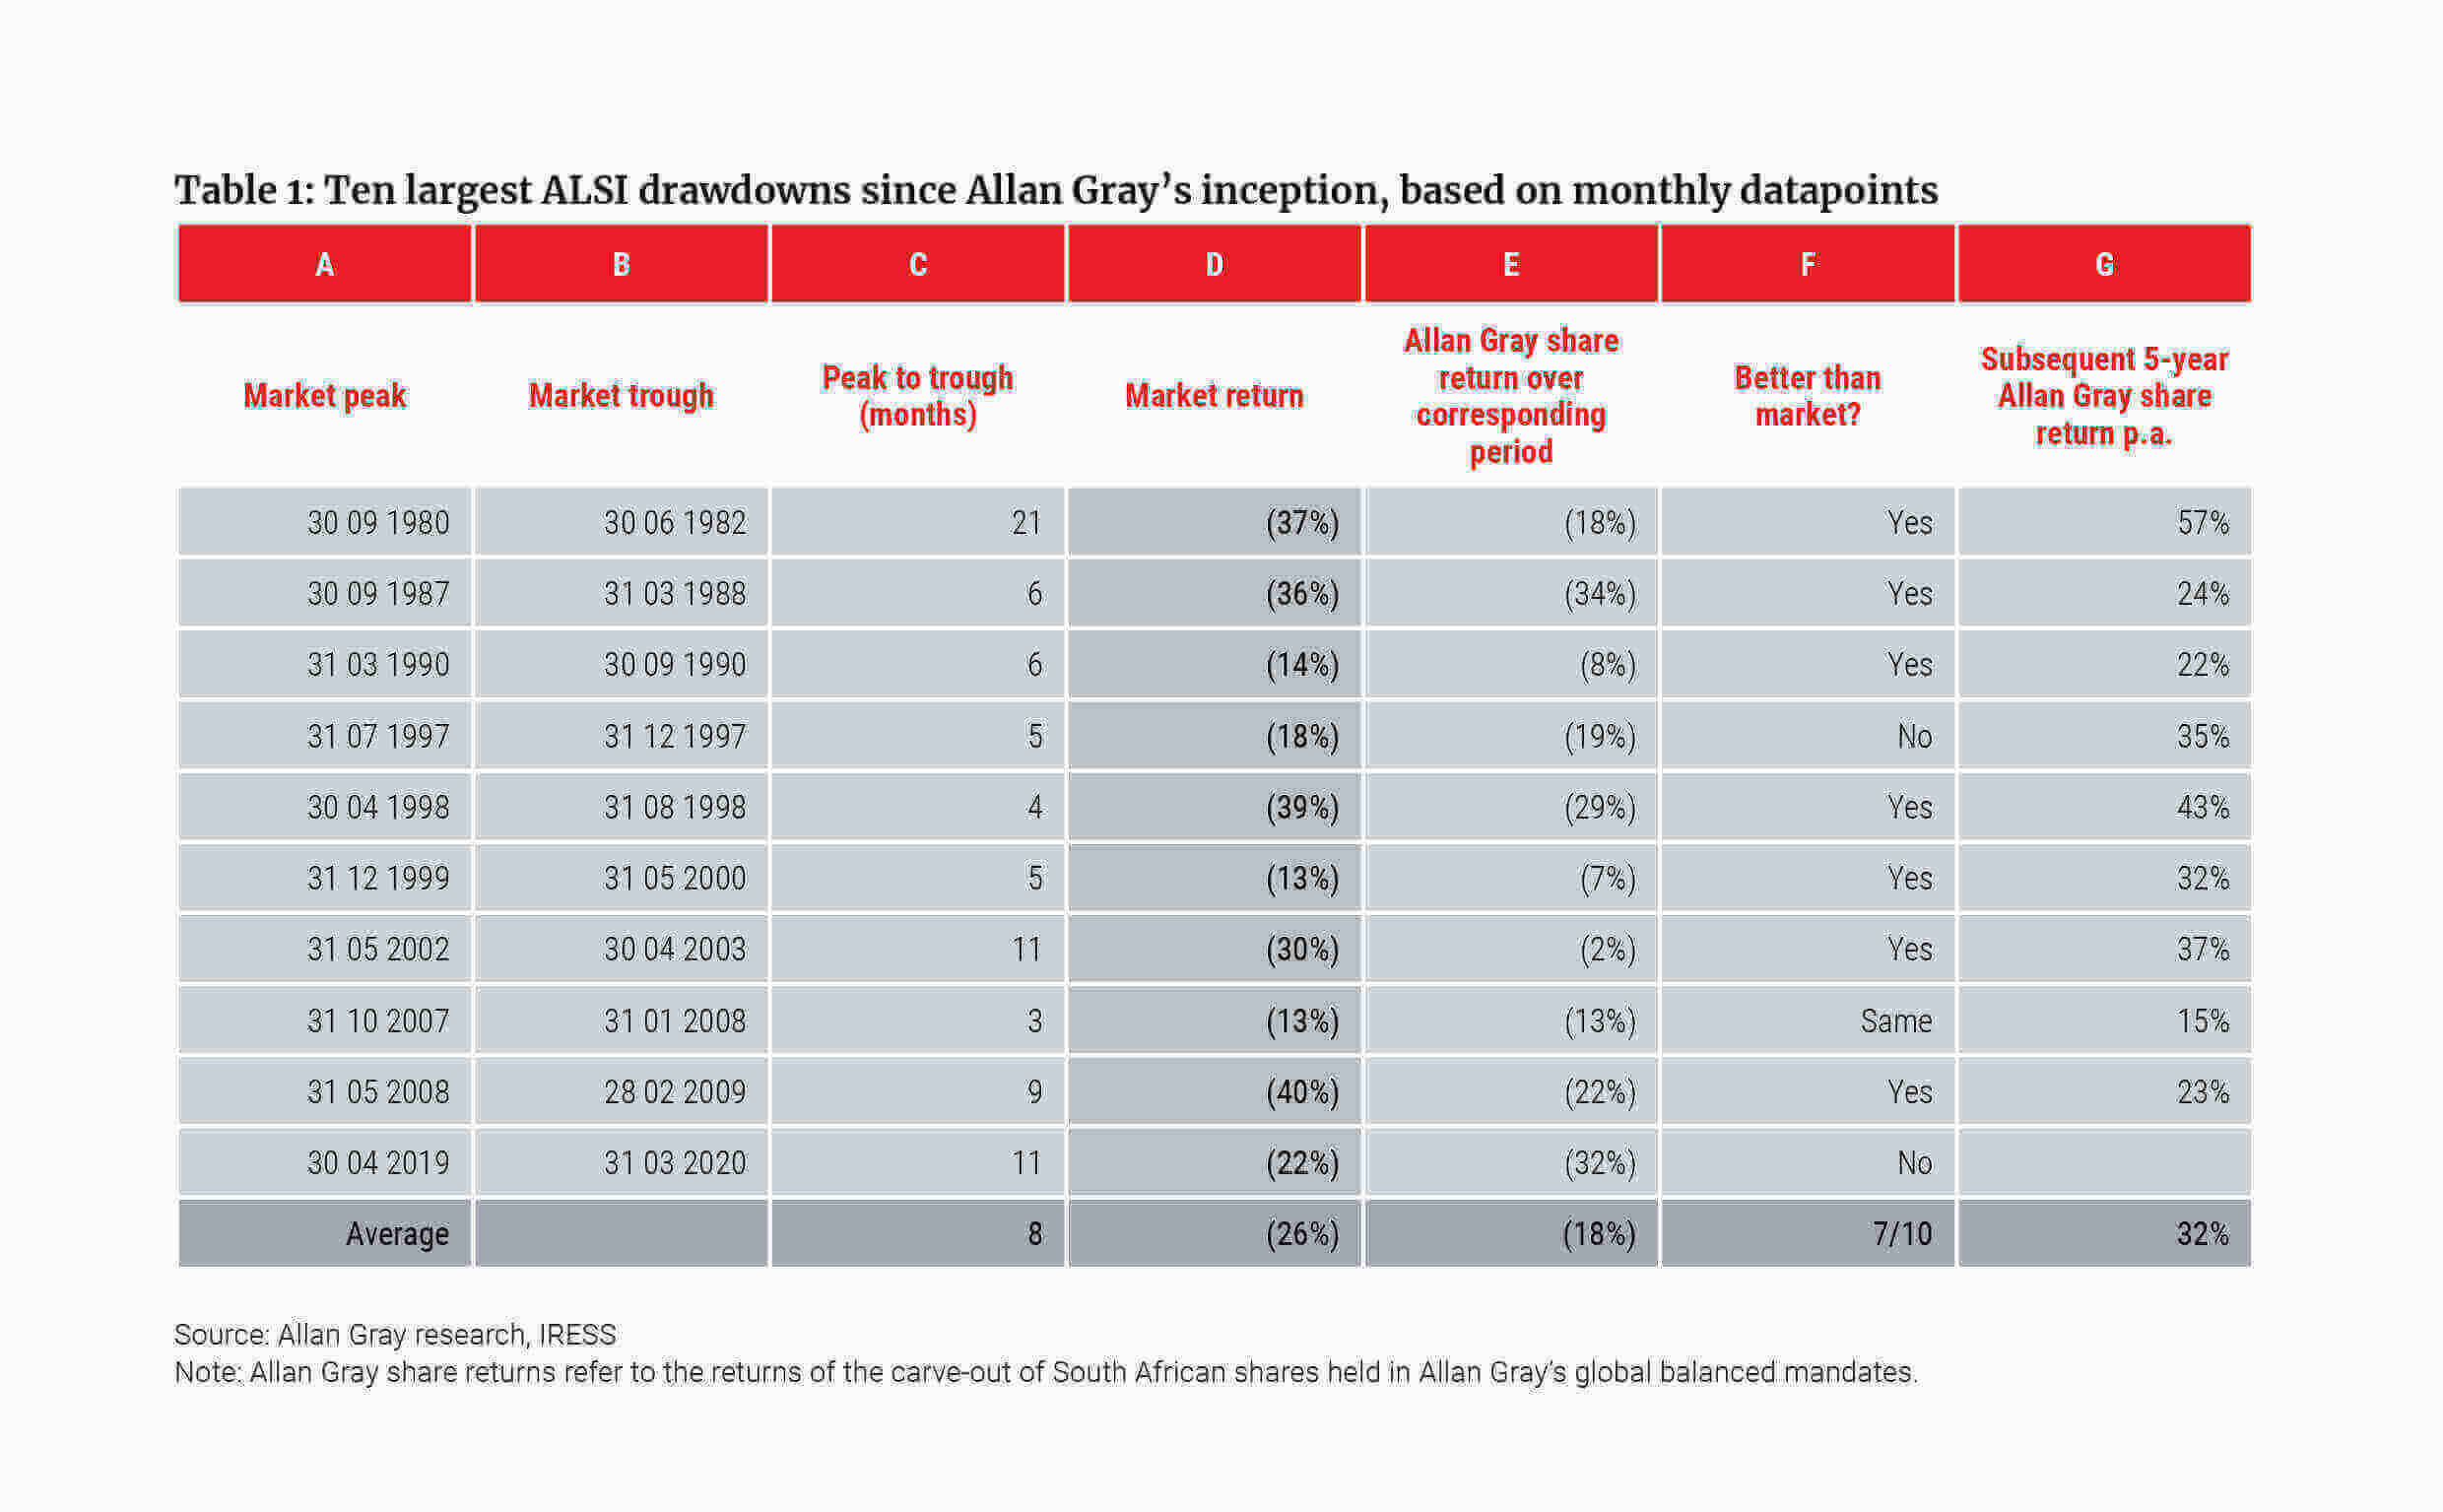 Ten largest ALSI drawdowns since Allan Gray's inception, based on monthly datapoints